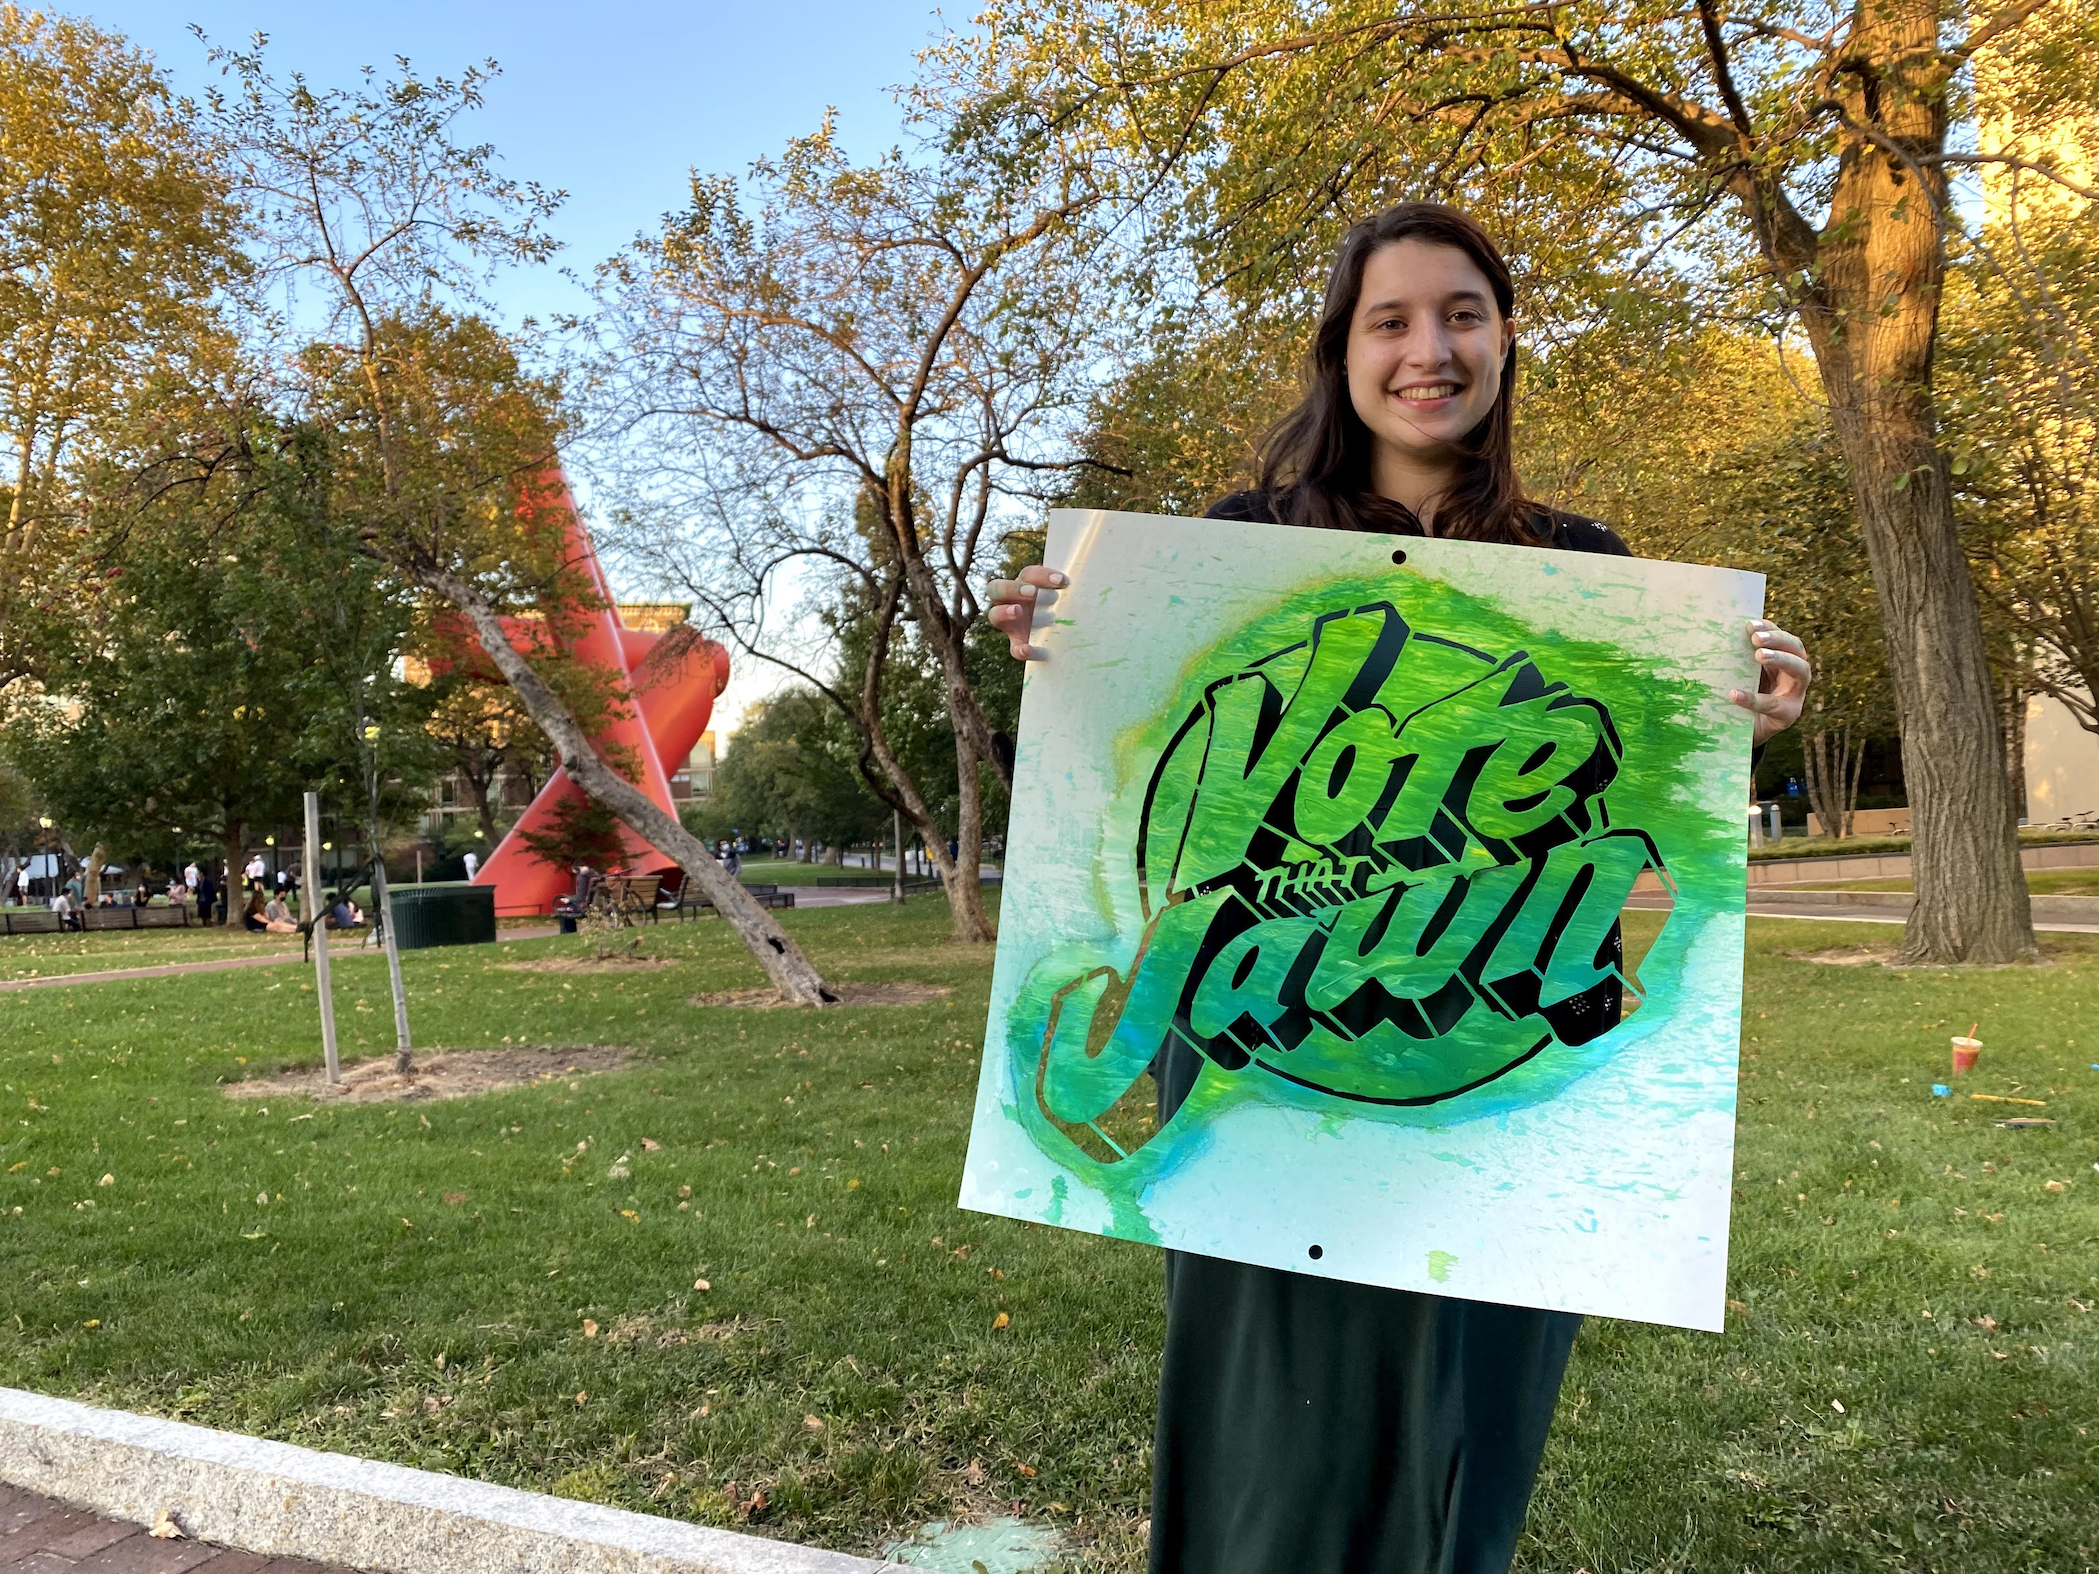 Student standing outside holding a sign reading Vote That Jawn with a towering sculpture behind her